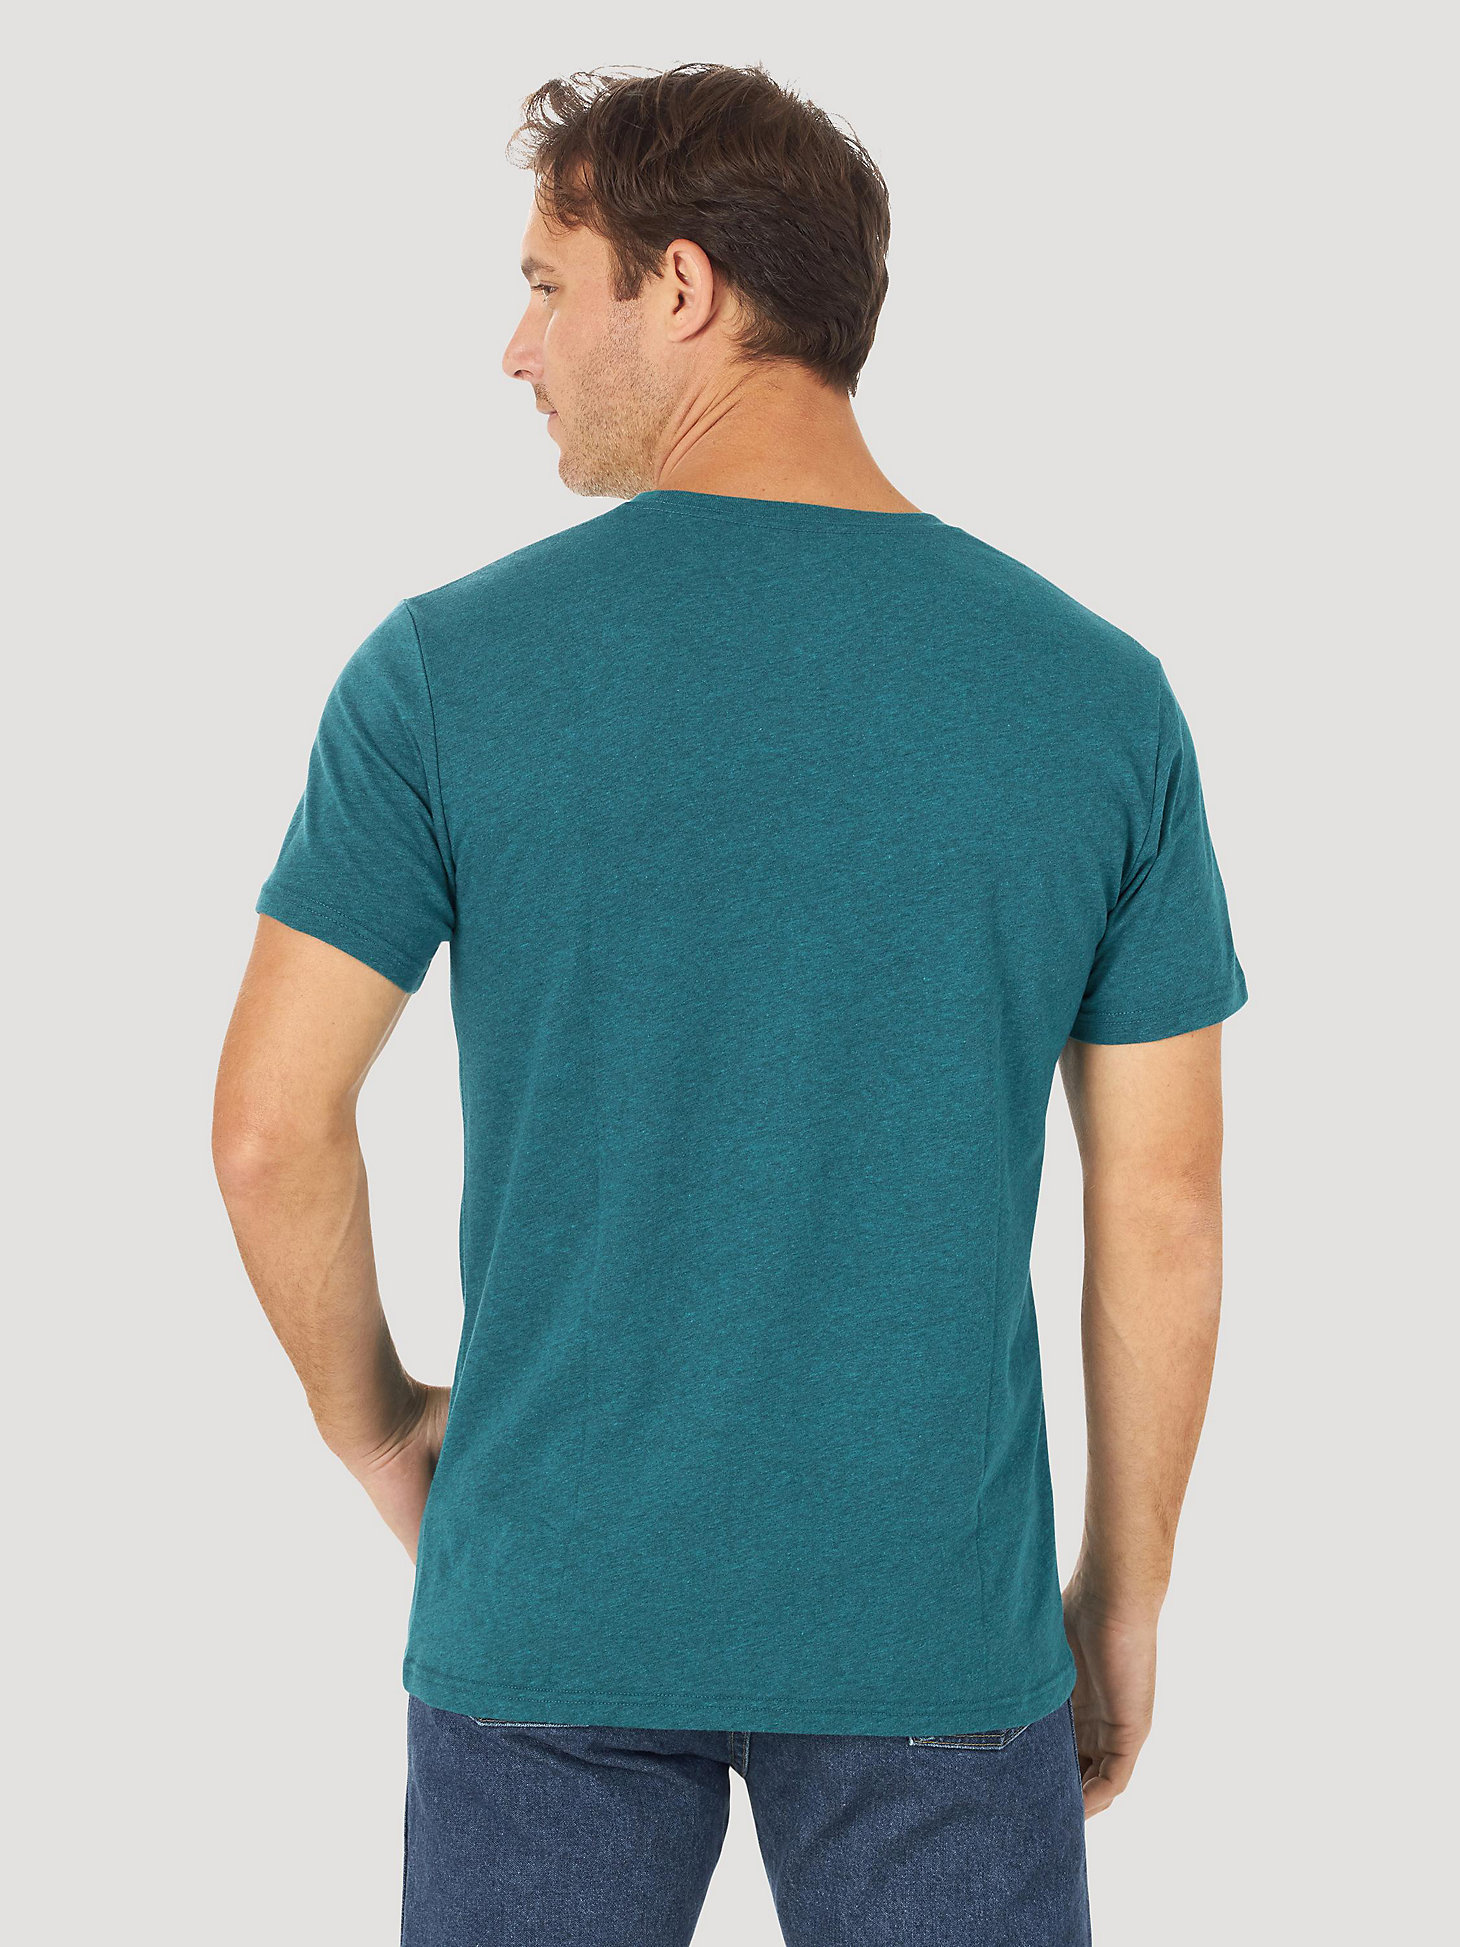 Men's George Strait King of Country Graphic T-Shirt in Cyan Pepper Heather alternative view 3